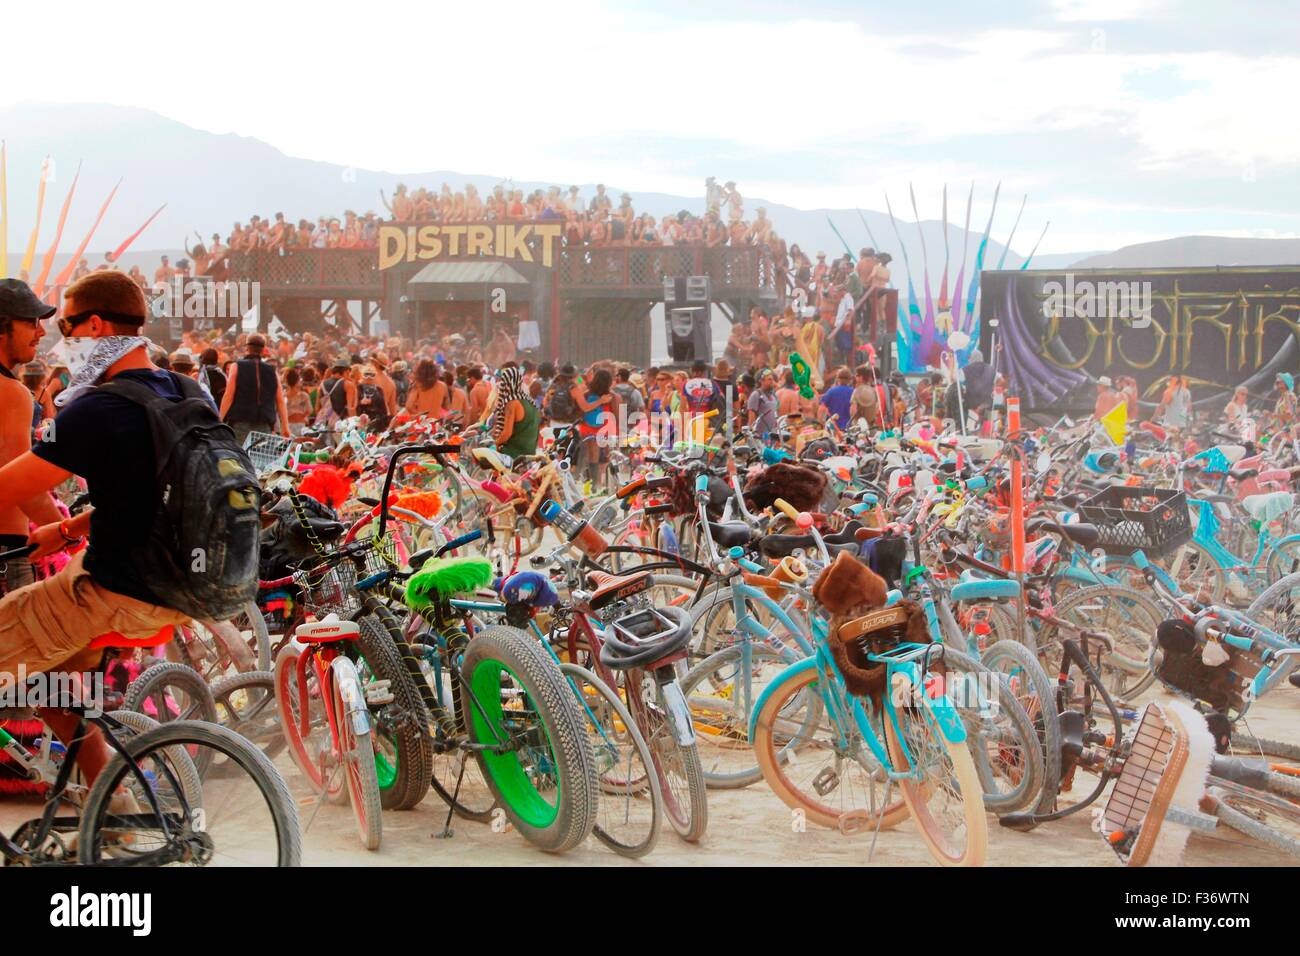 Hundreds of bicycles parked in the playa during the annual Burning Man festival in the desert August 30, 2014 in Black Rock City, Nevada. Stock Photo